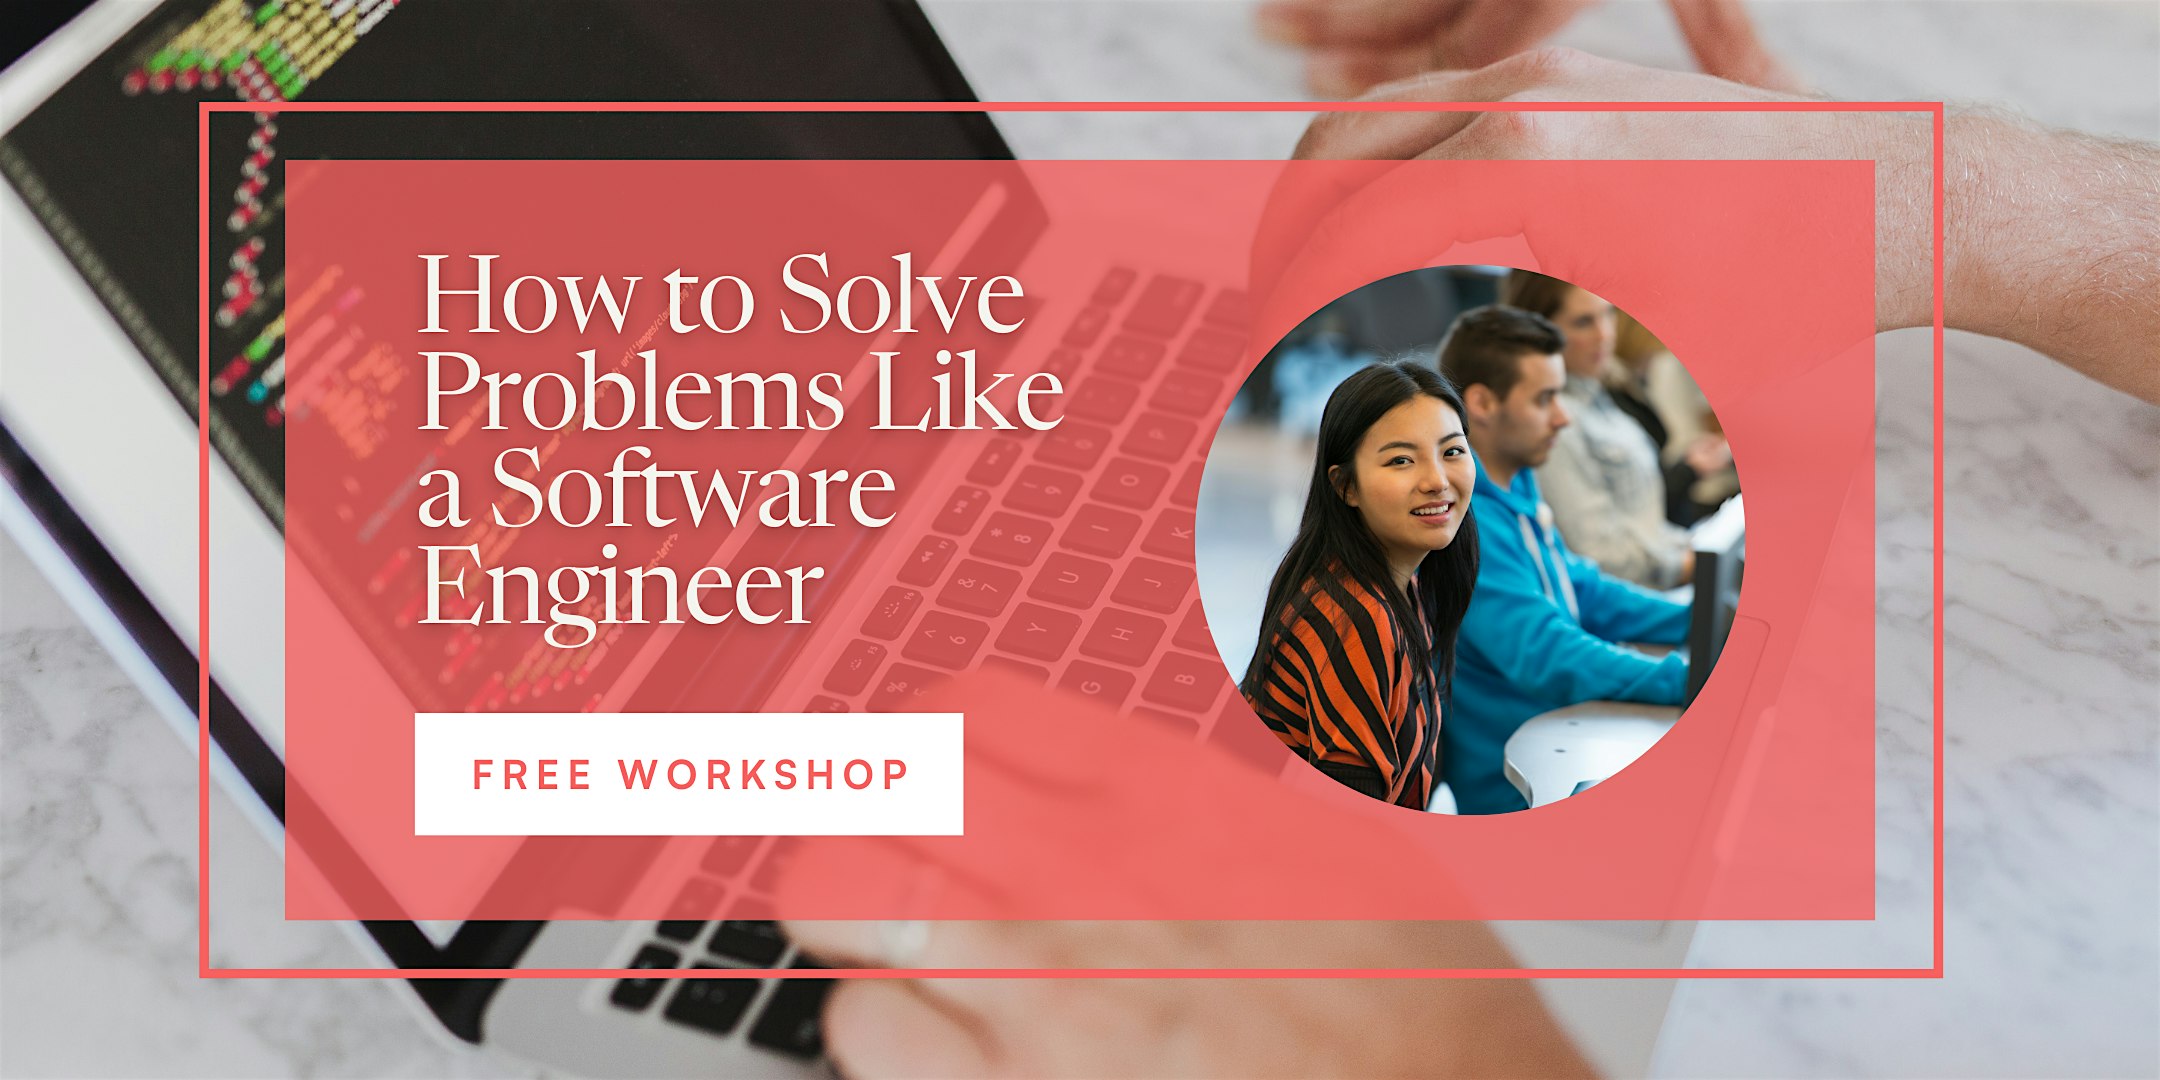 How to Solve Problems Like a Software Engineer